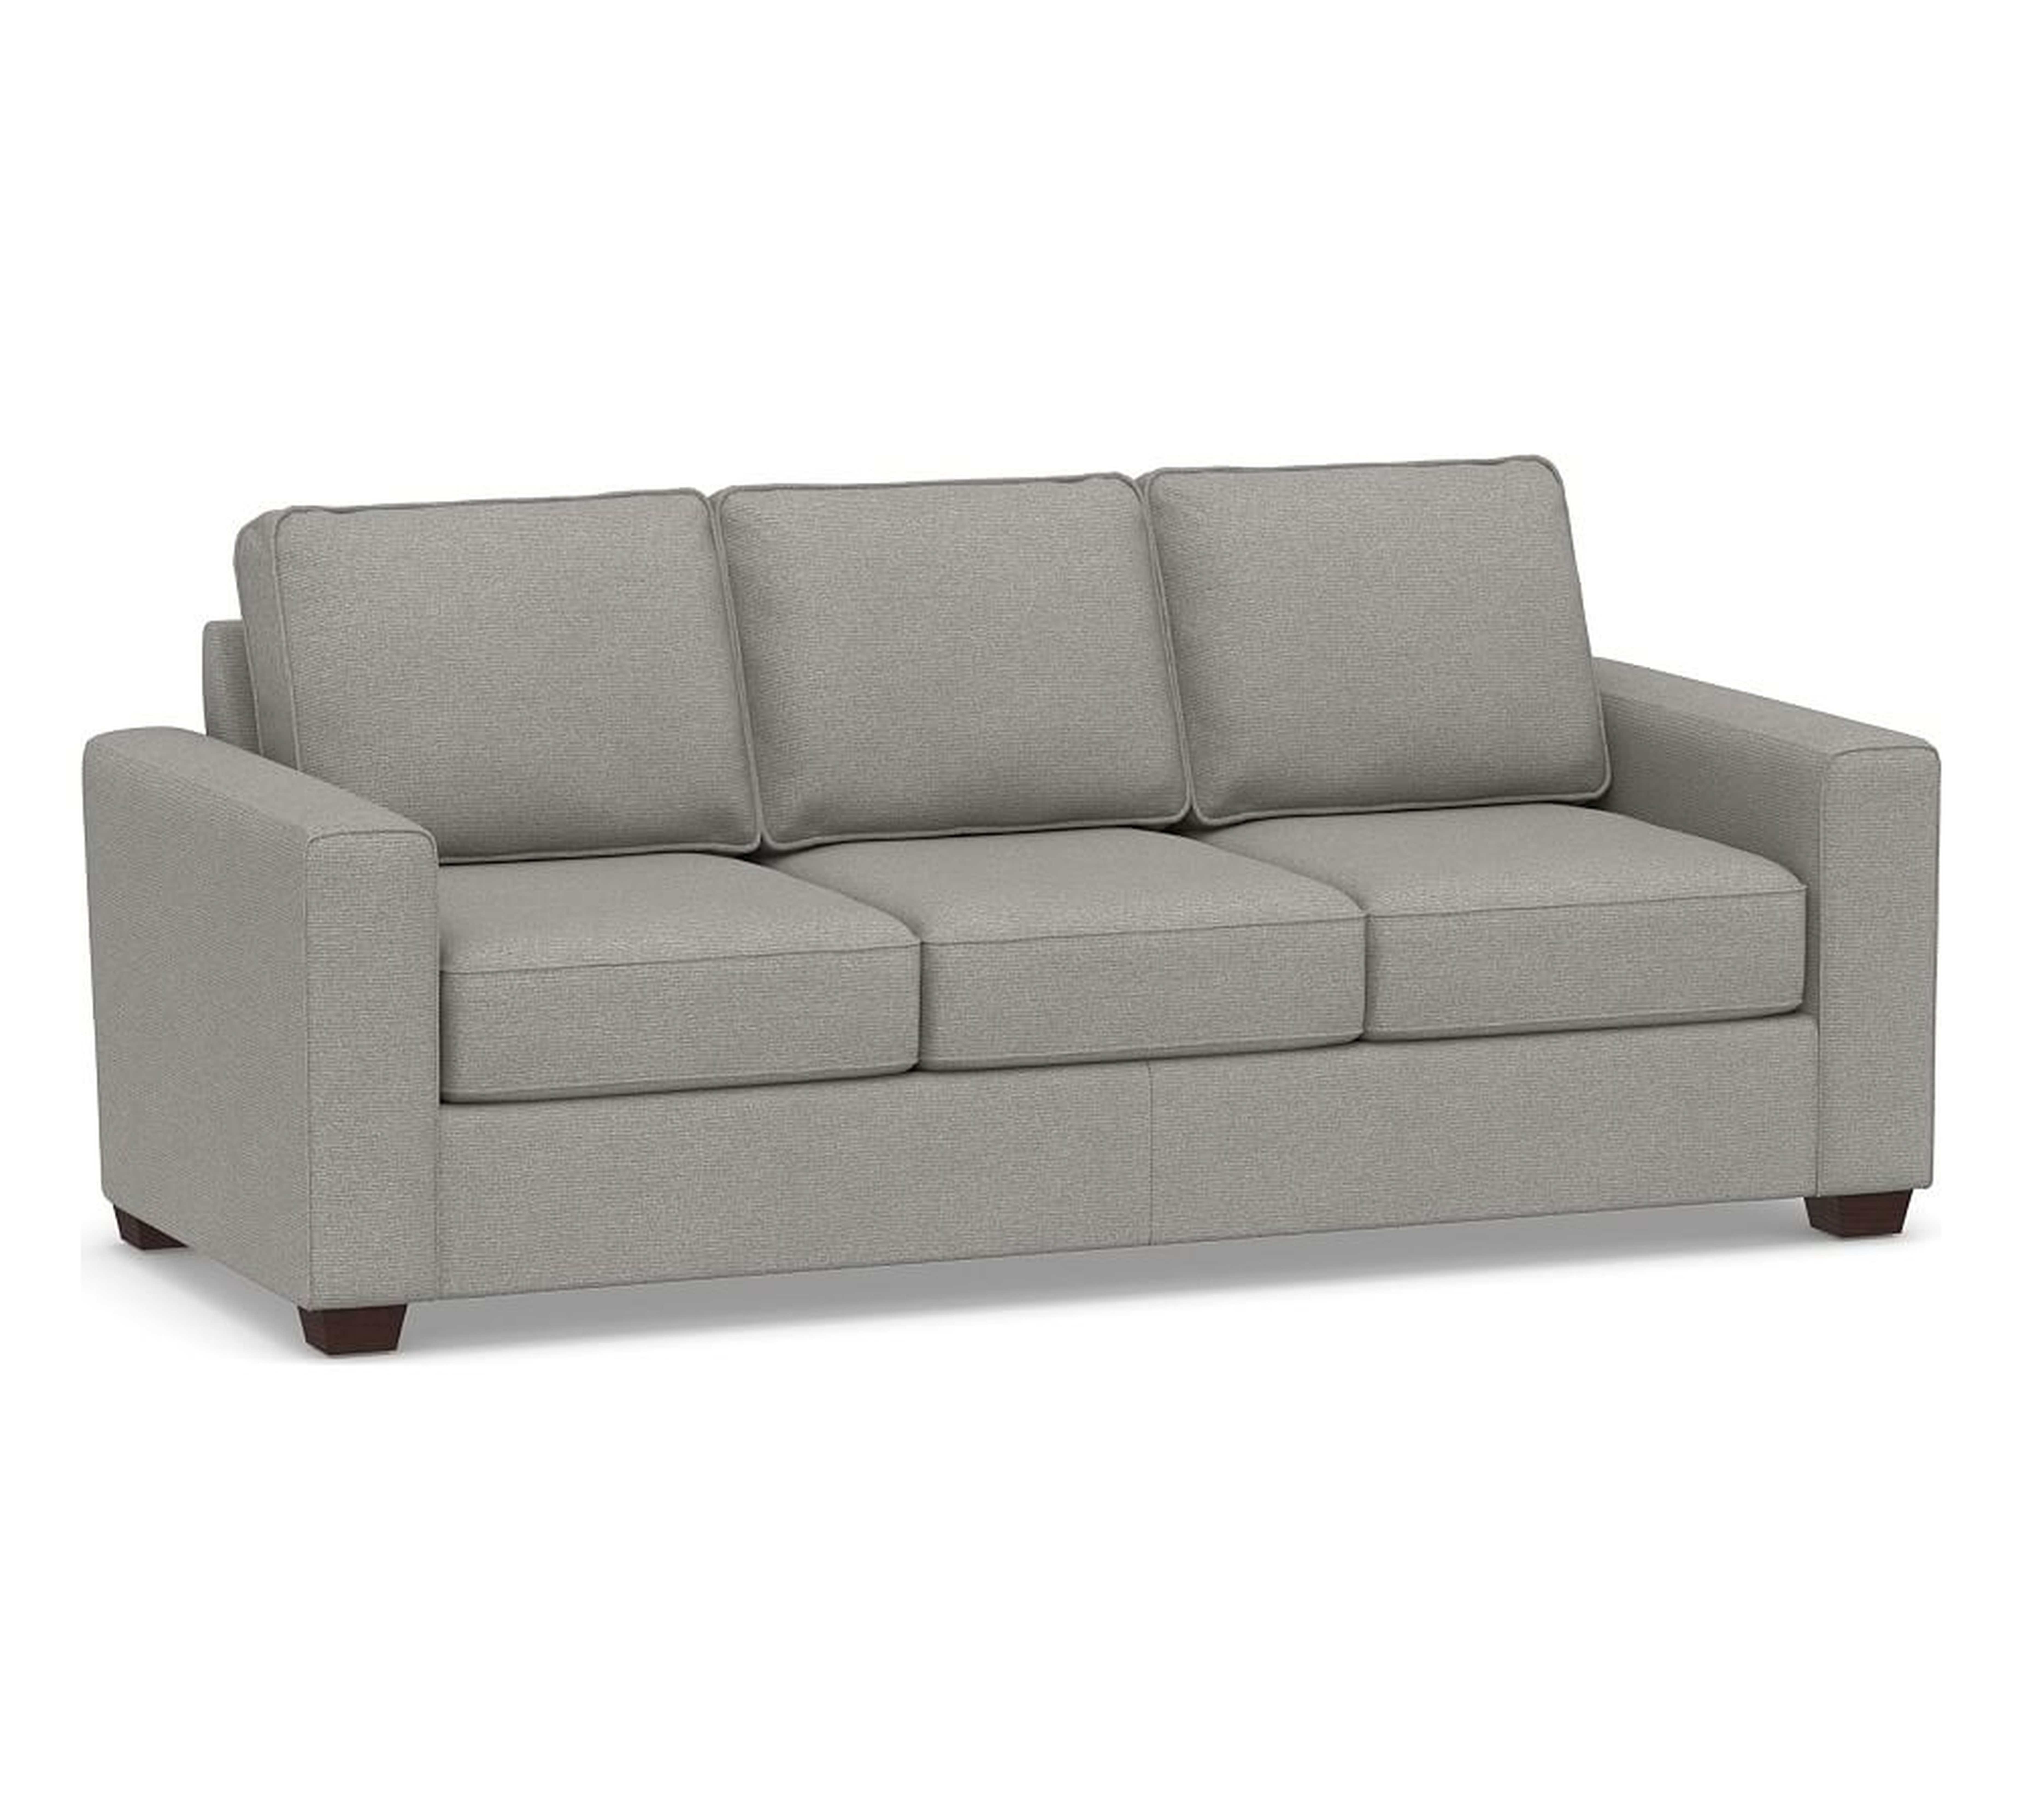 SoMa Fremont Square Arm Upholstered Grand Sofa 81", Polyester Wrapped Cushions, Performance Heathered Basketweave Platinum - Pottery Barn